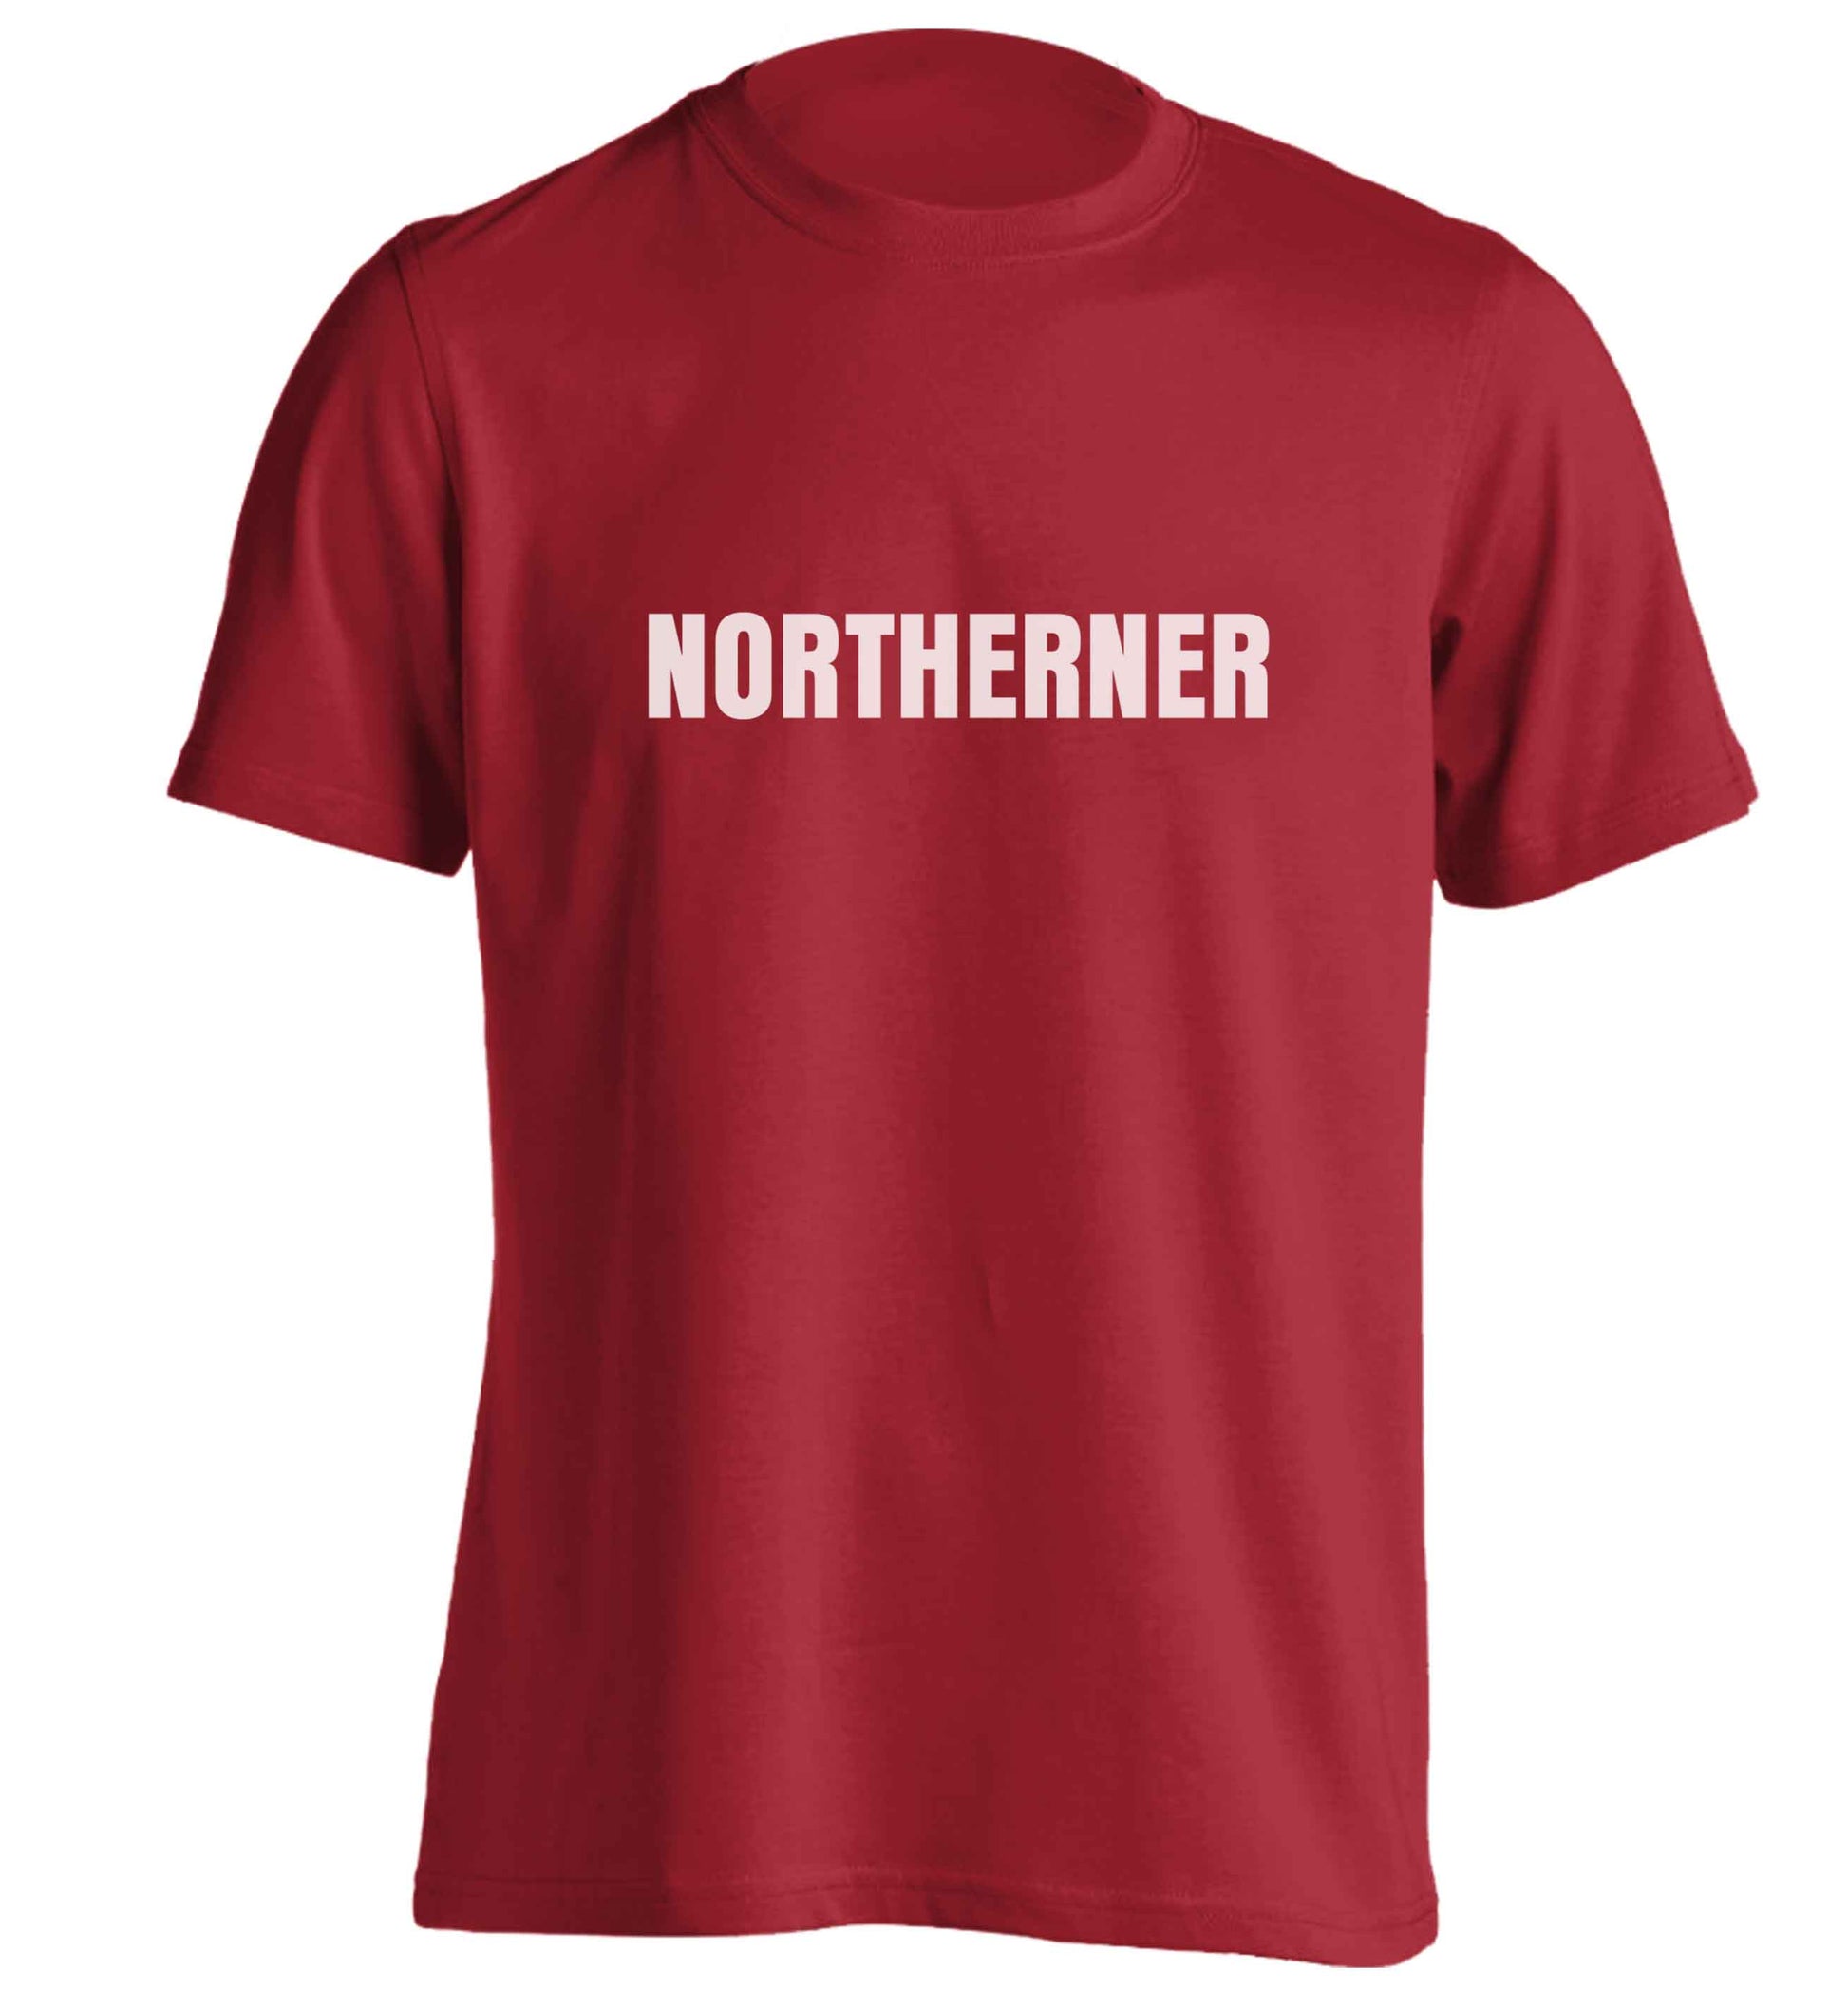 Northerner adults unisex red Tshirt 2XL